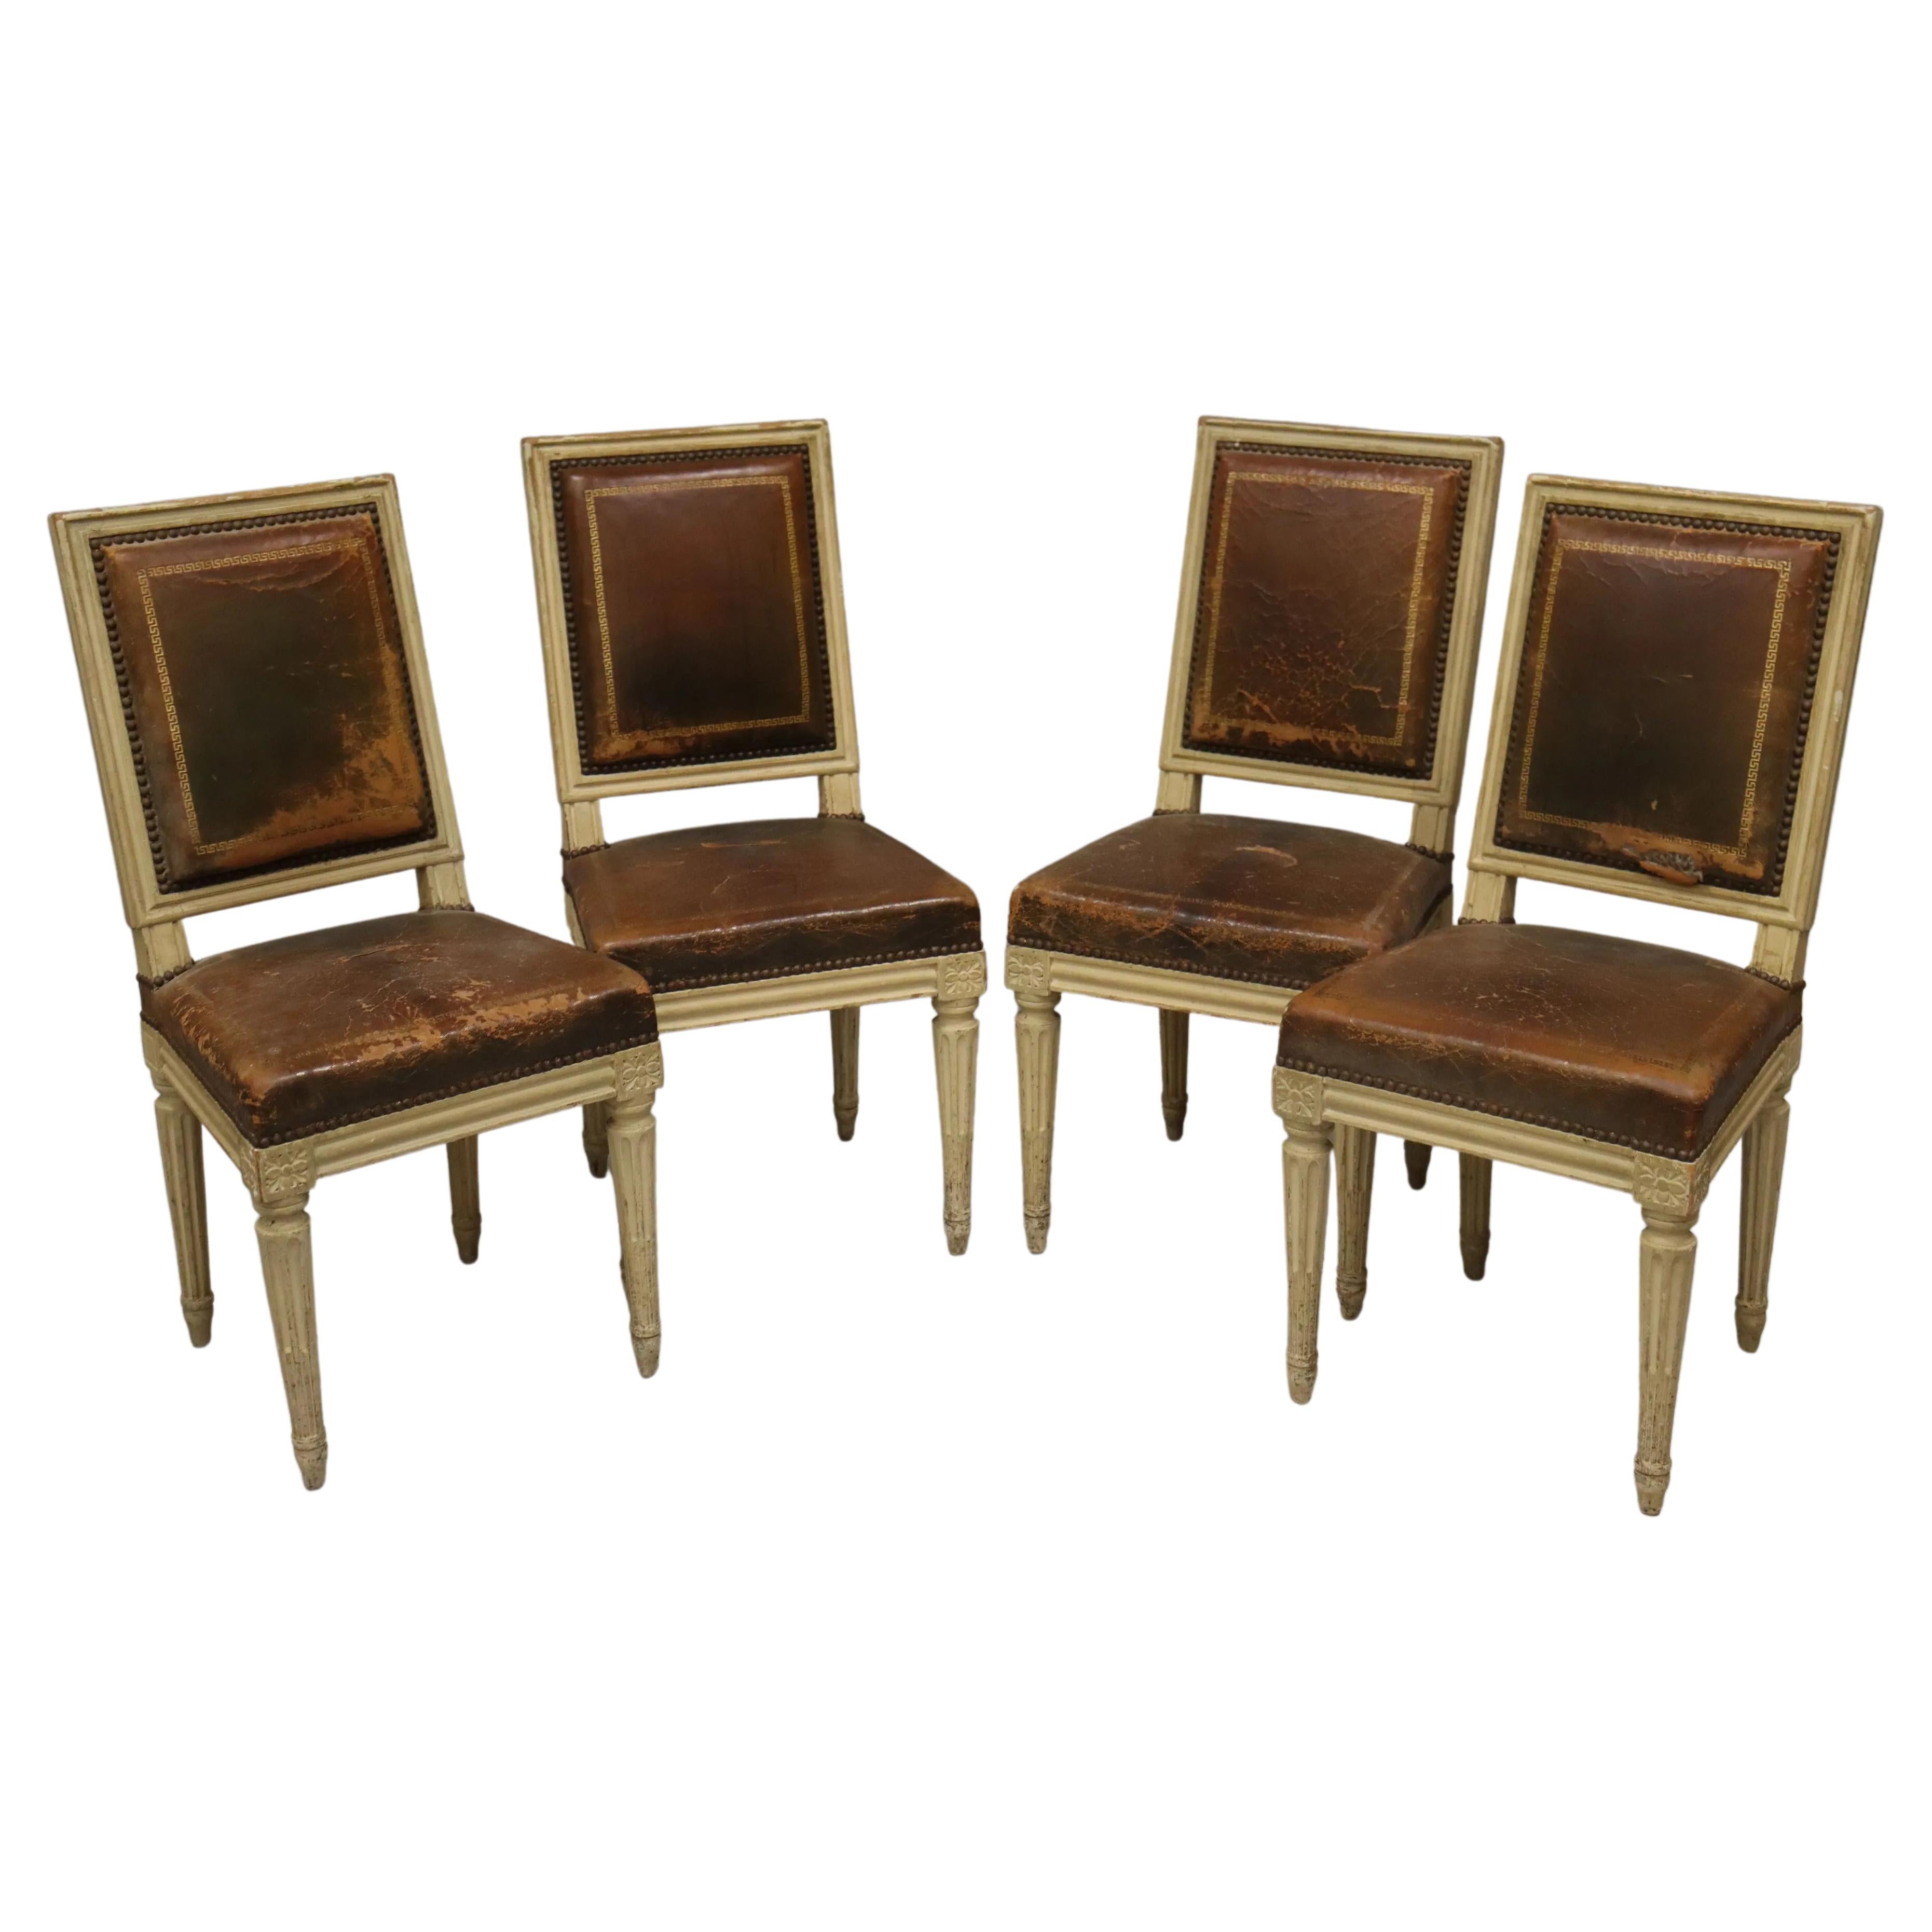 Armand Albert Rateau Suite of Four Neo Classic Louis XVI Style Chair